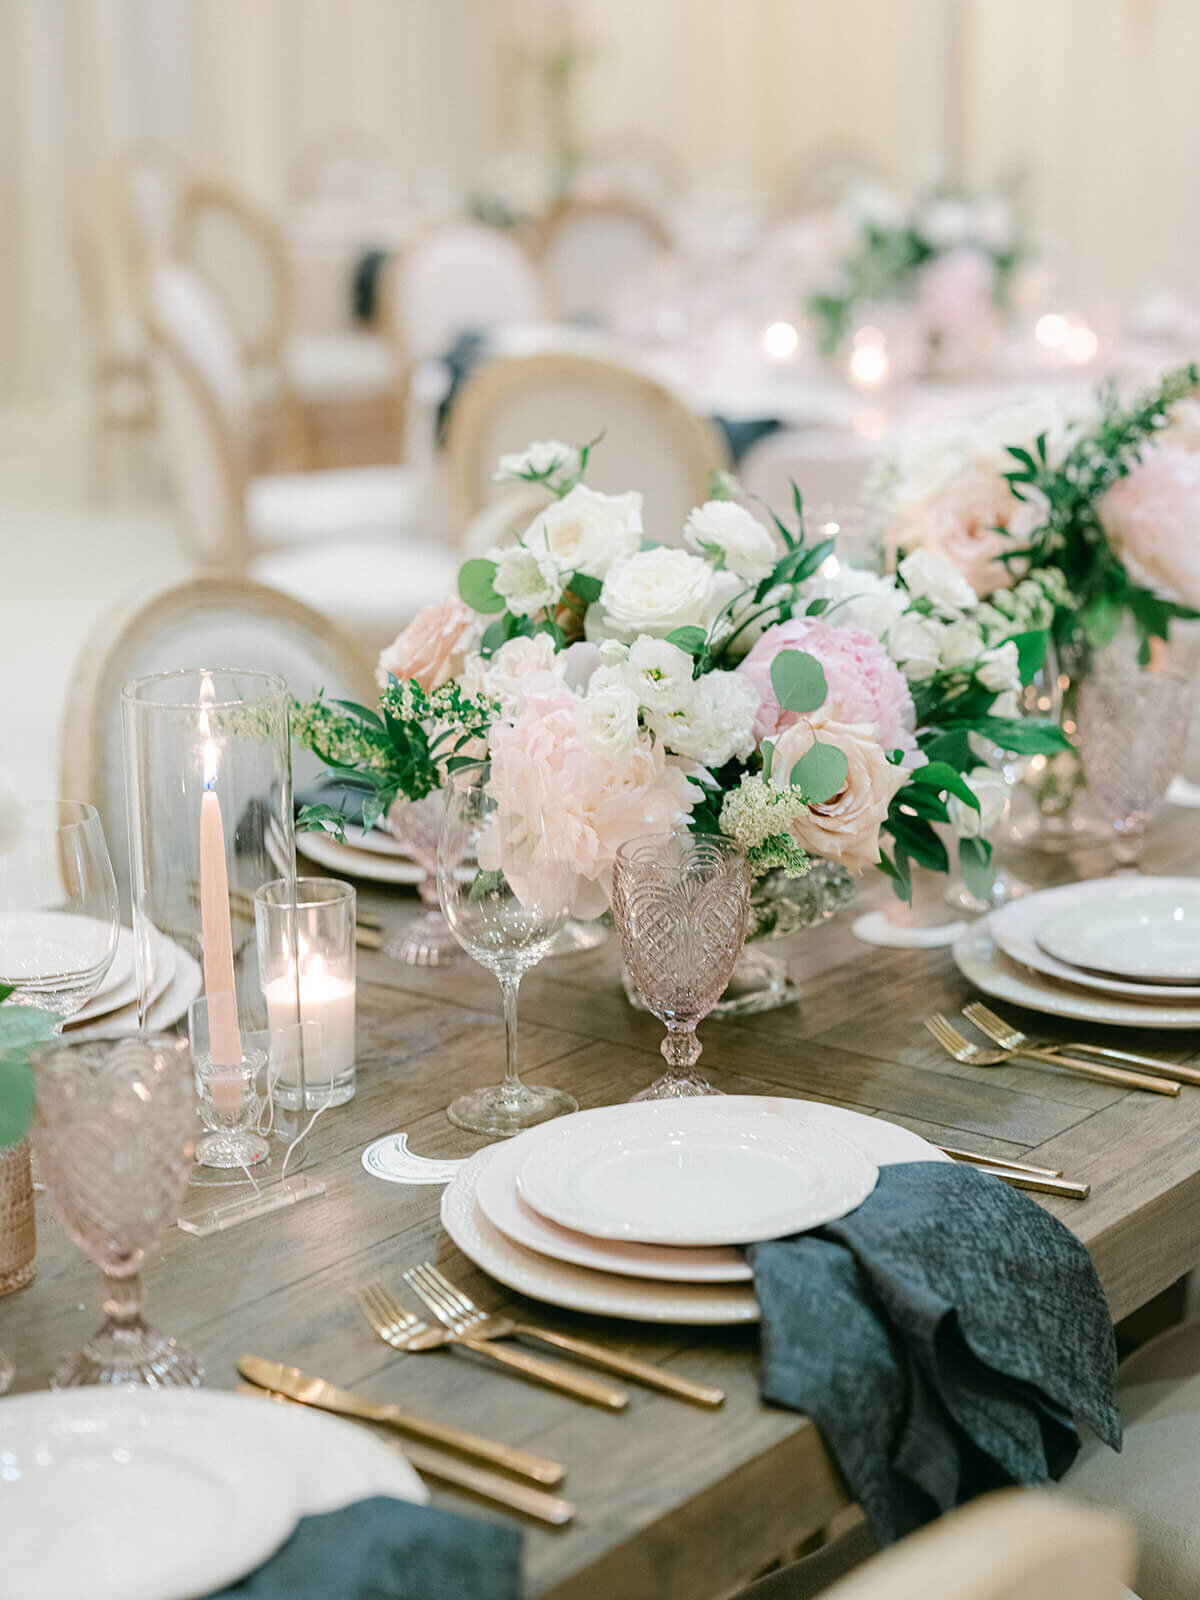 Custom teal and blush place settings at a Boulder, Colorado wedding